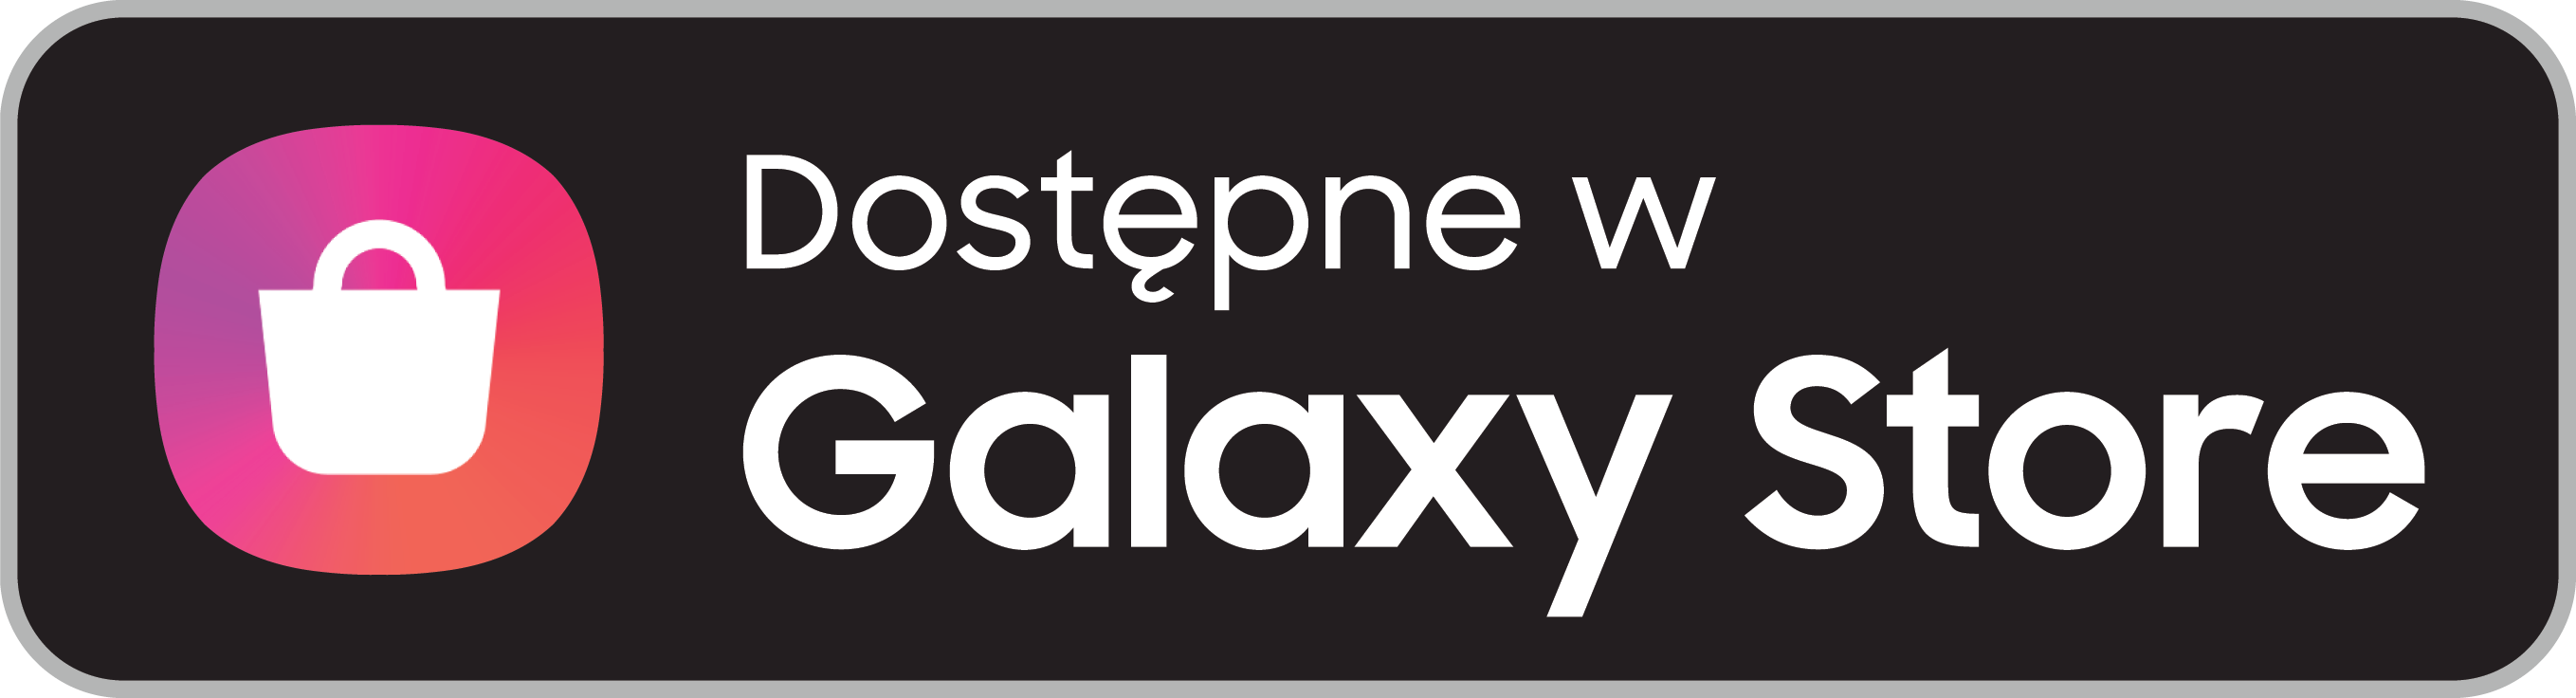 GalaxyStore_PL.png